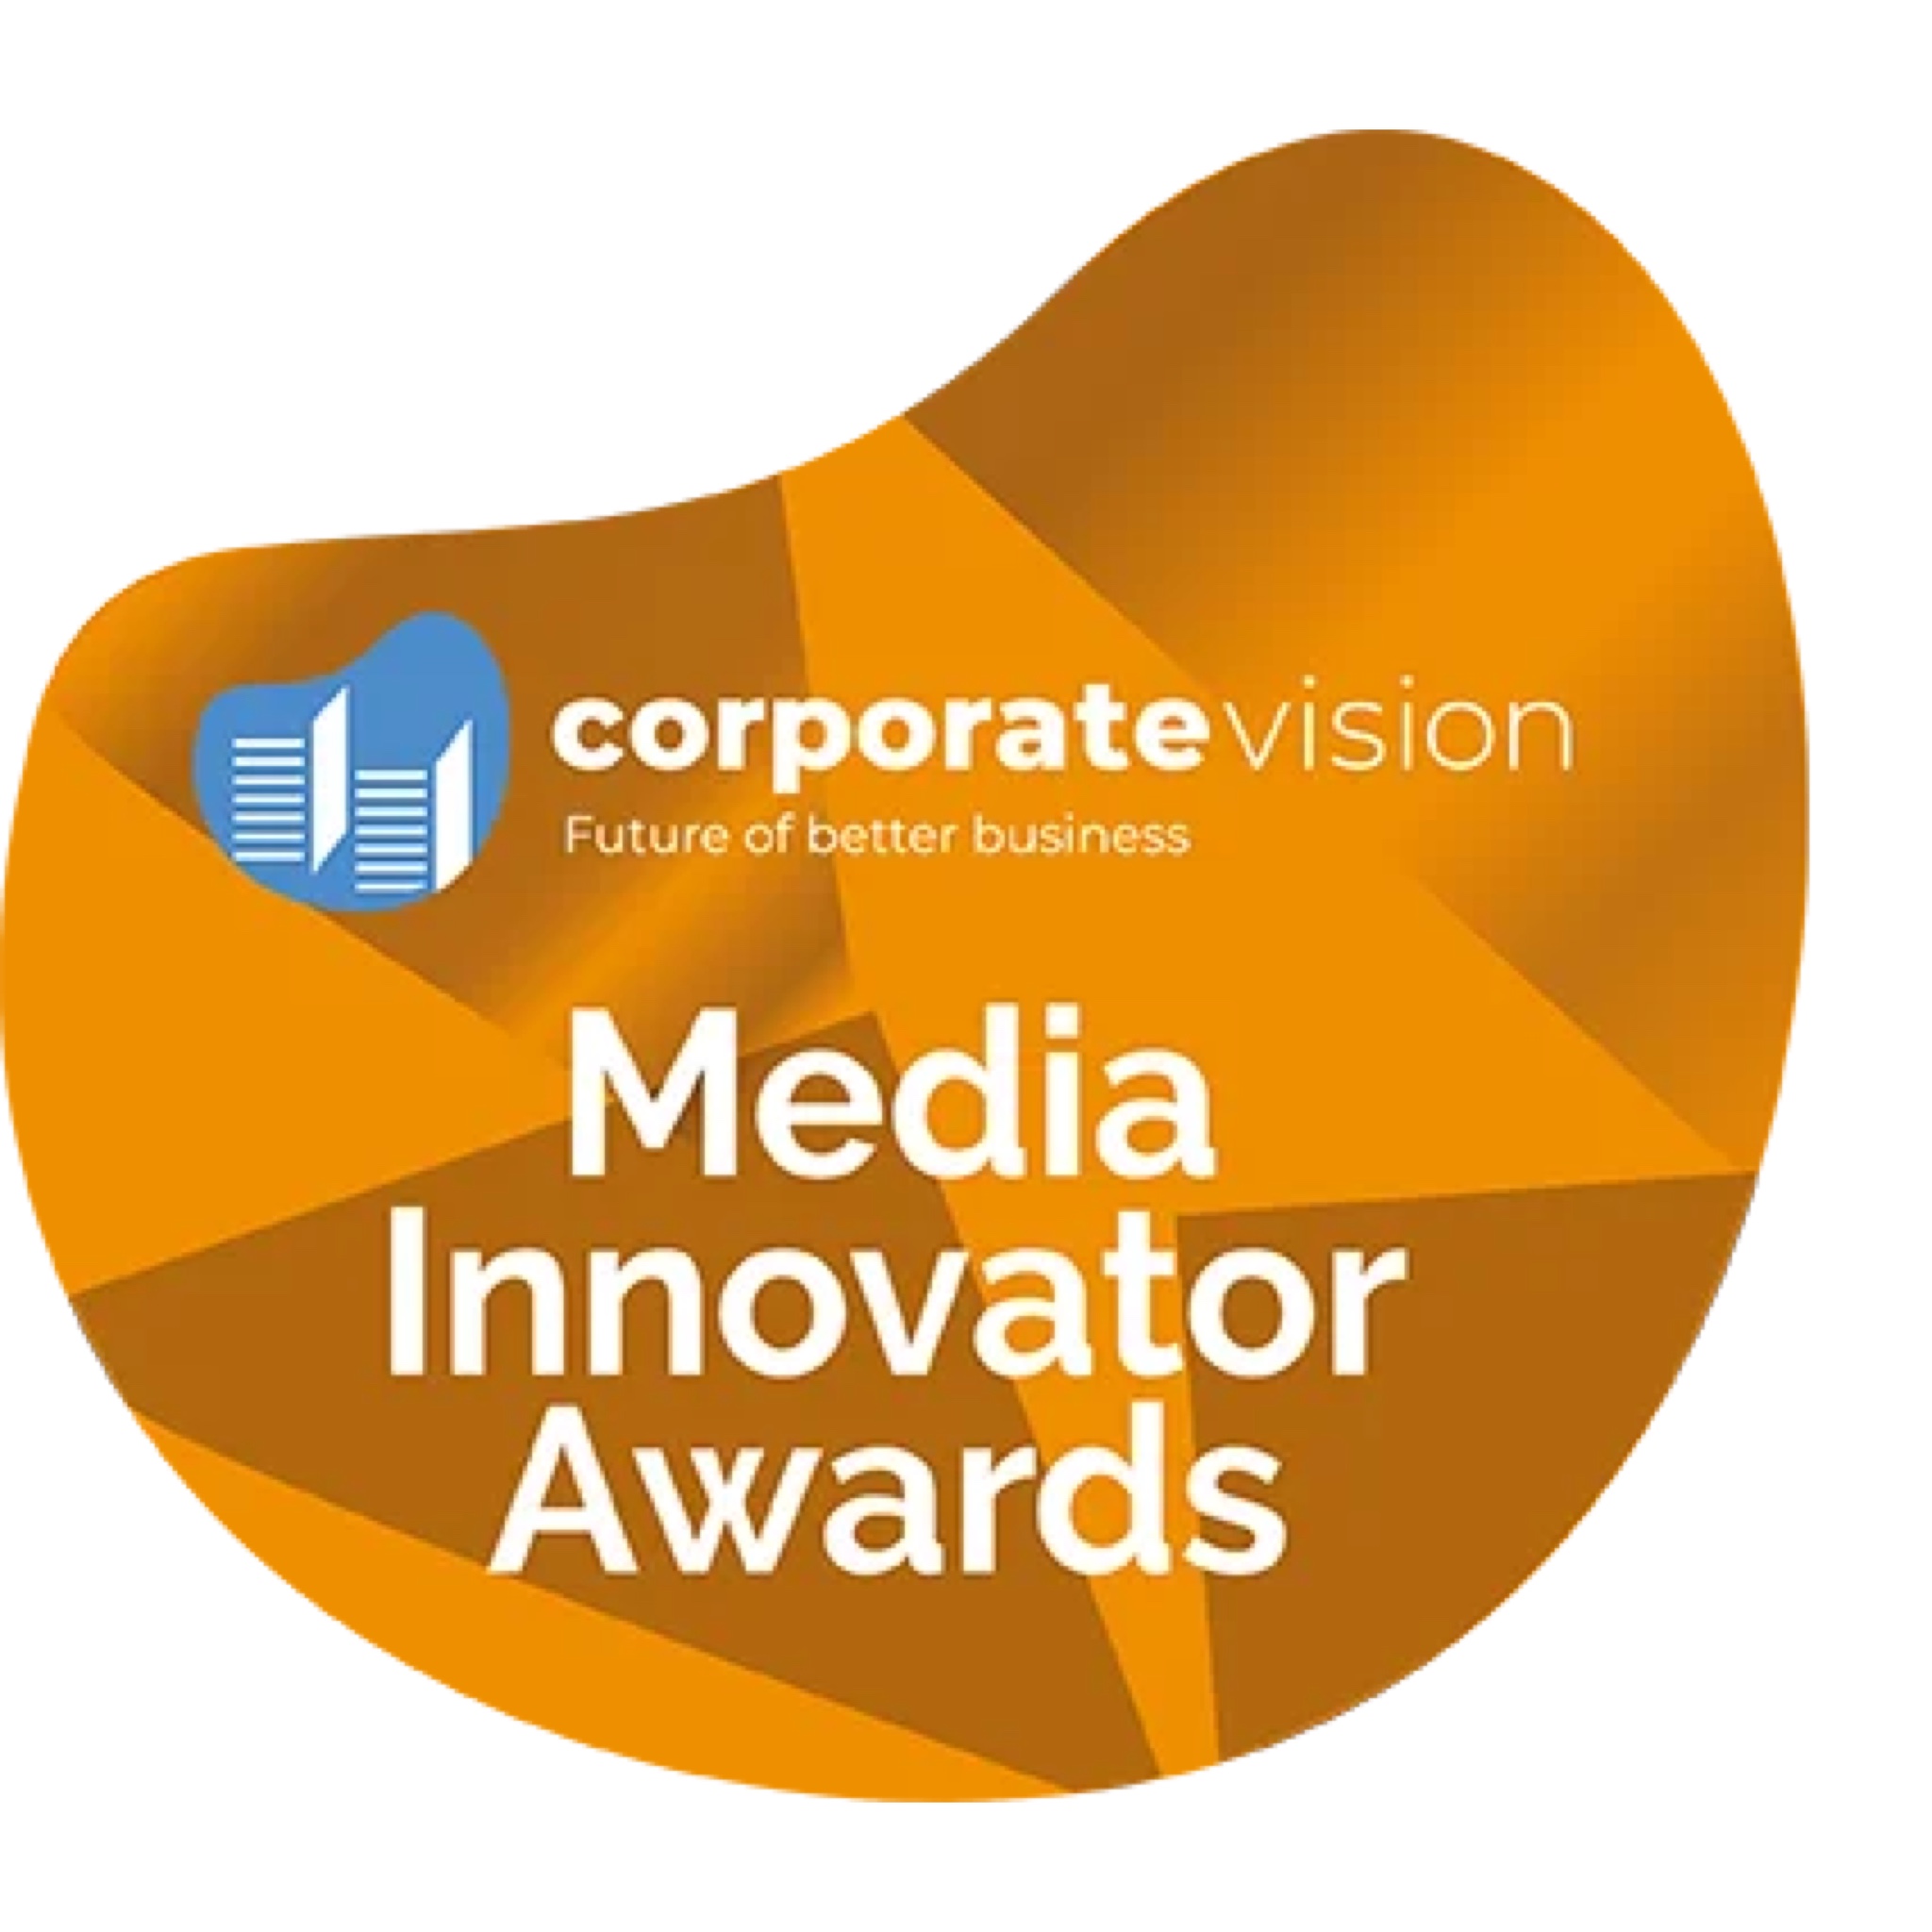 United States agency Altered State Productions wins Media Innovator Awards - Corporate Vision award